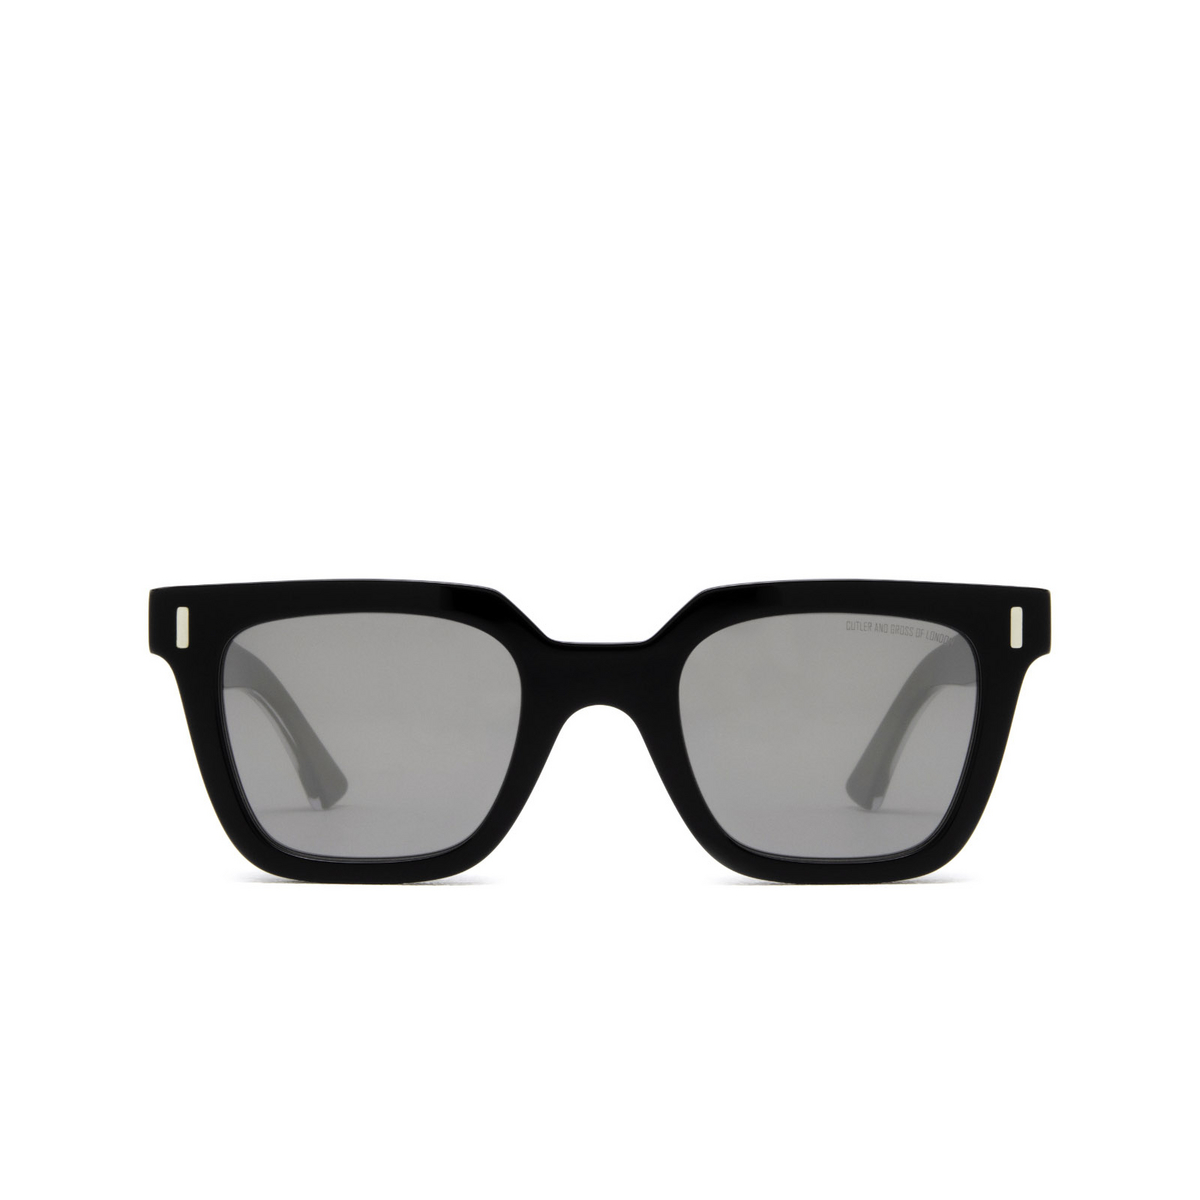 Cutler and Gross 1305 Sunglasses 03 Black - front view